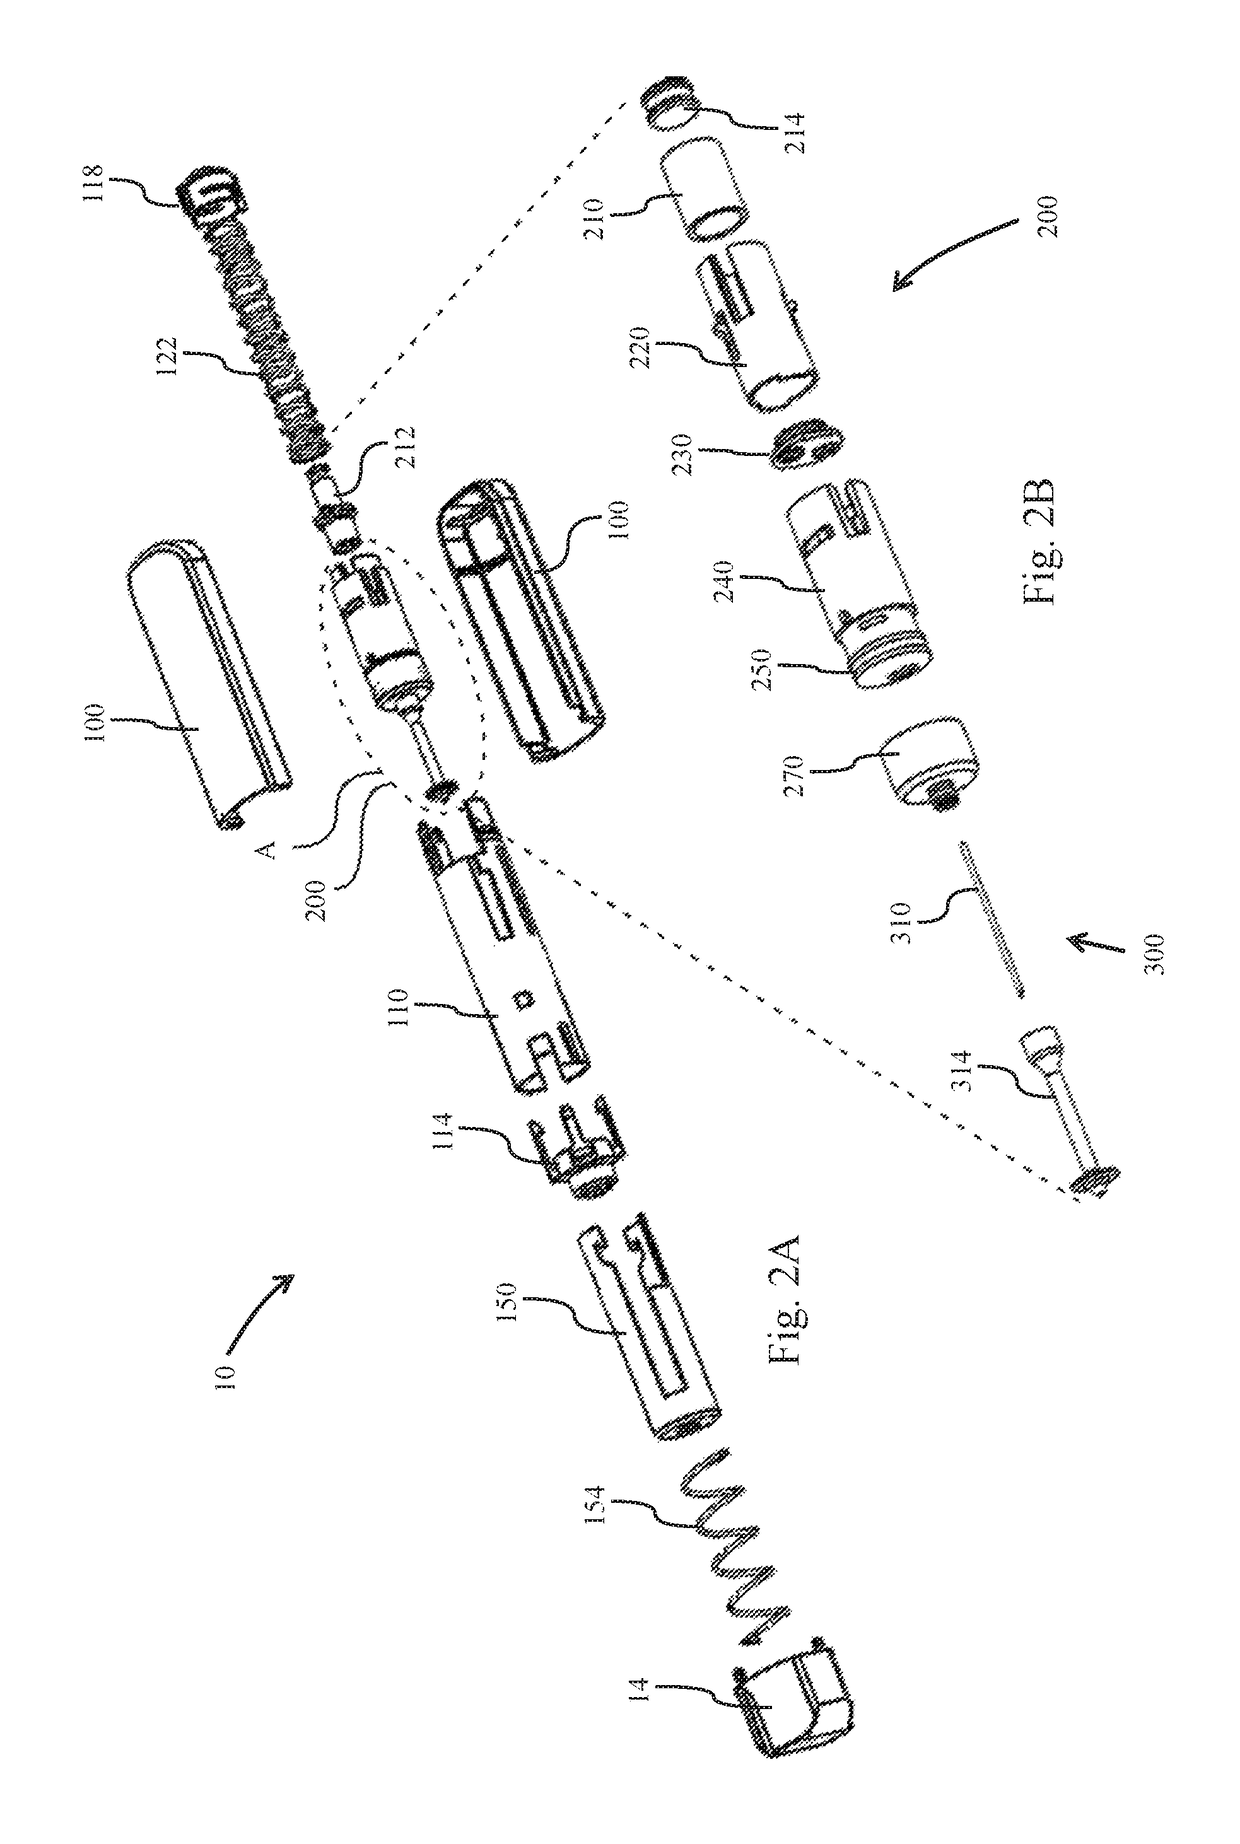 Mixing and injection device with sterility features